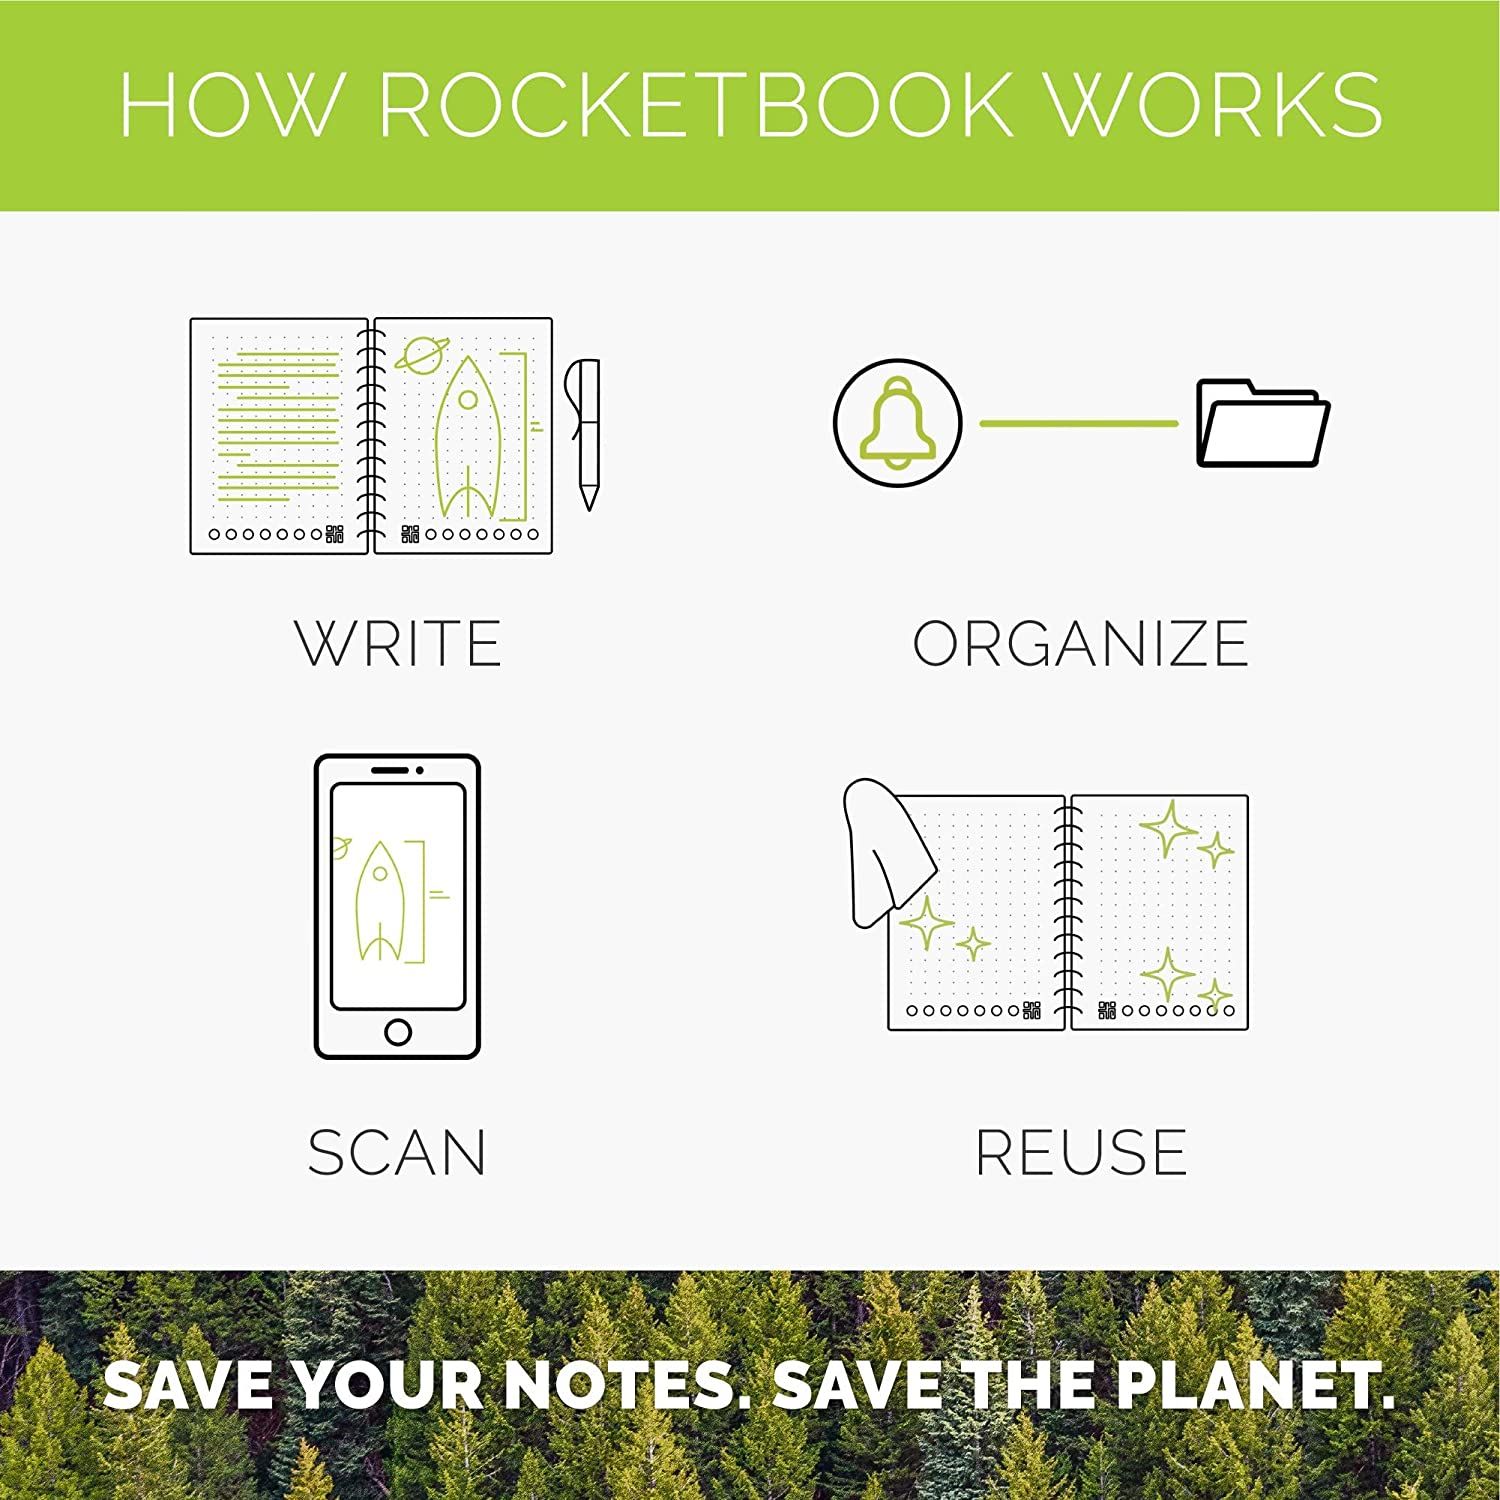 Rocketbook Smart Notebook features and how to use